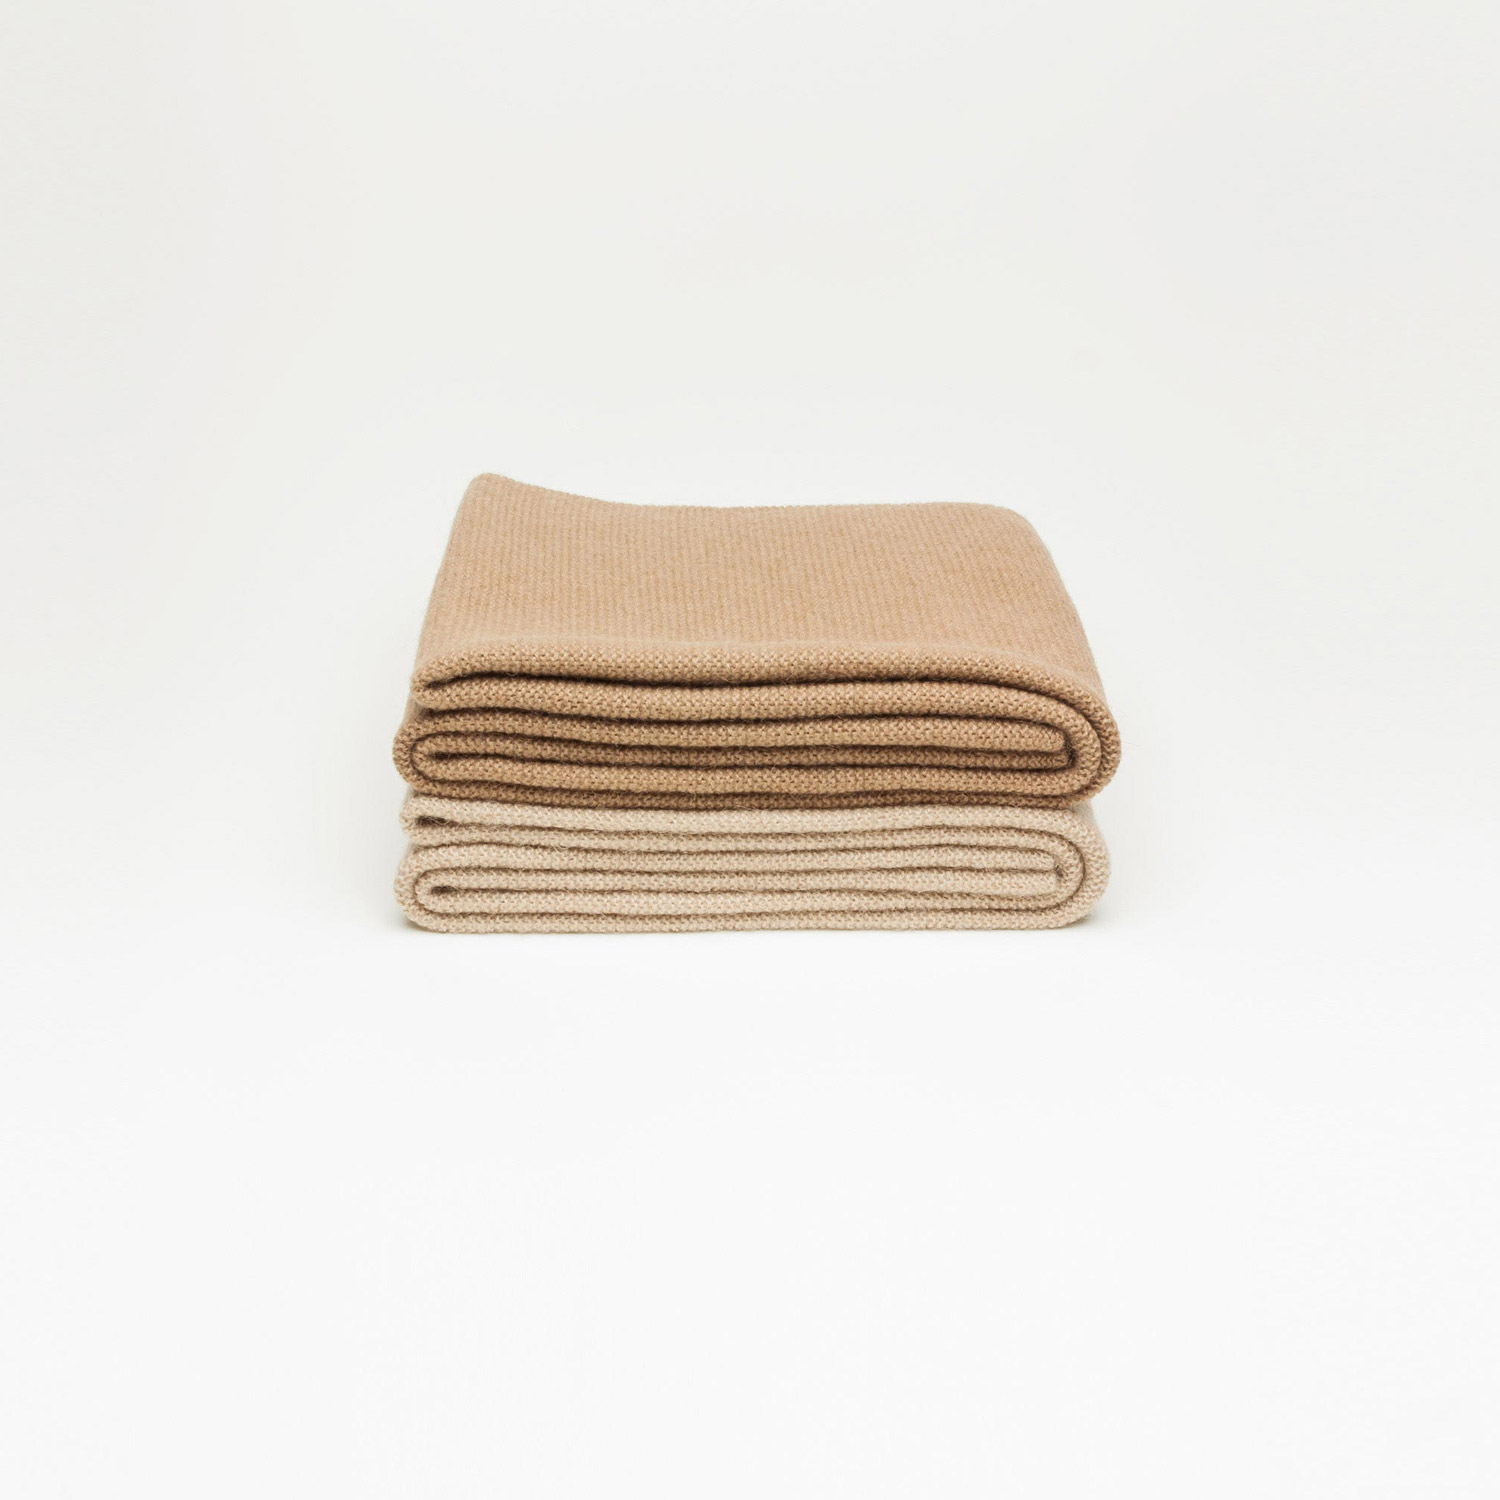 The Casual Camel Hair Scarf by Rimma Tchilingarian, Kamelhaar, Schal